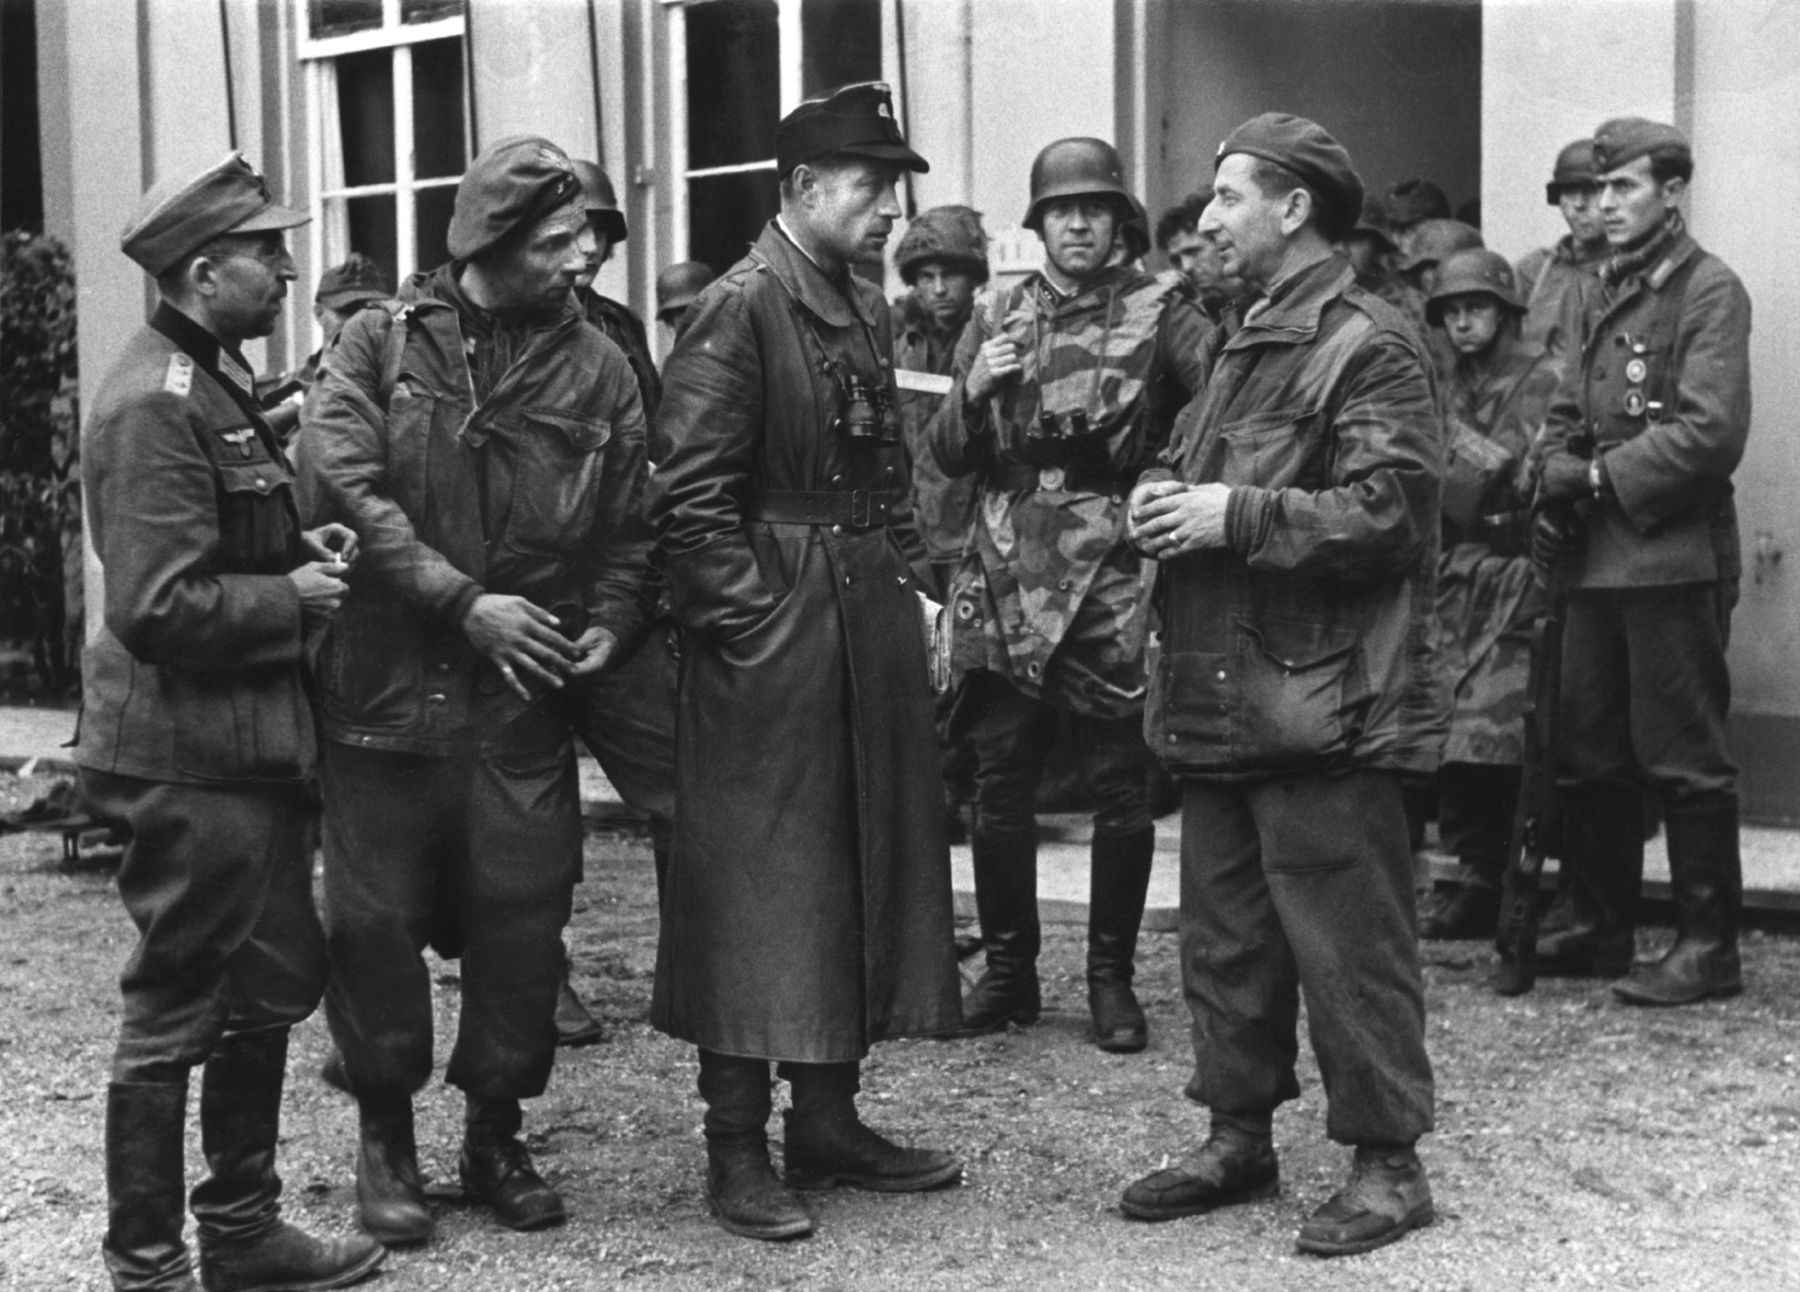 Lieutenant Colonel Marcin Rotter of the Polish 1st Independent Parachute Brigade is interrogated by his Waffen SS captors following the failed Operation Market Garden.